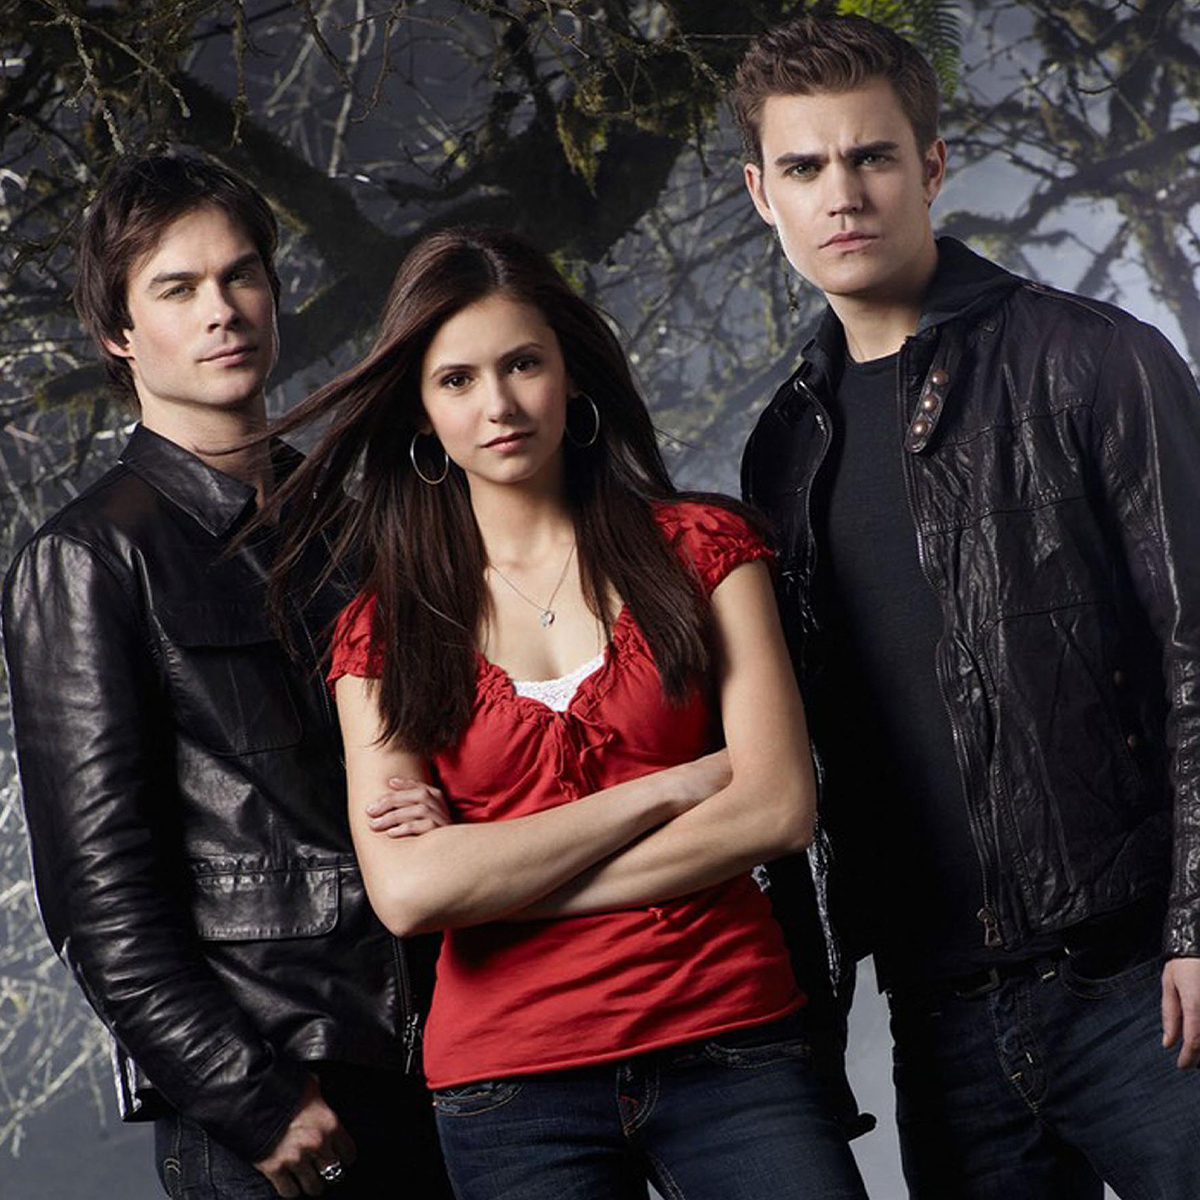 The Vampire Diaries Universe is Officially Over. What Now?